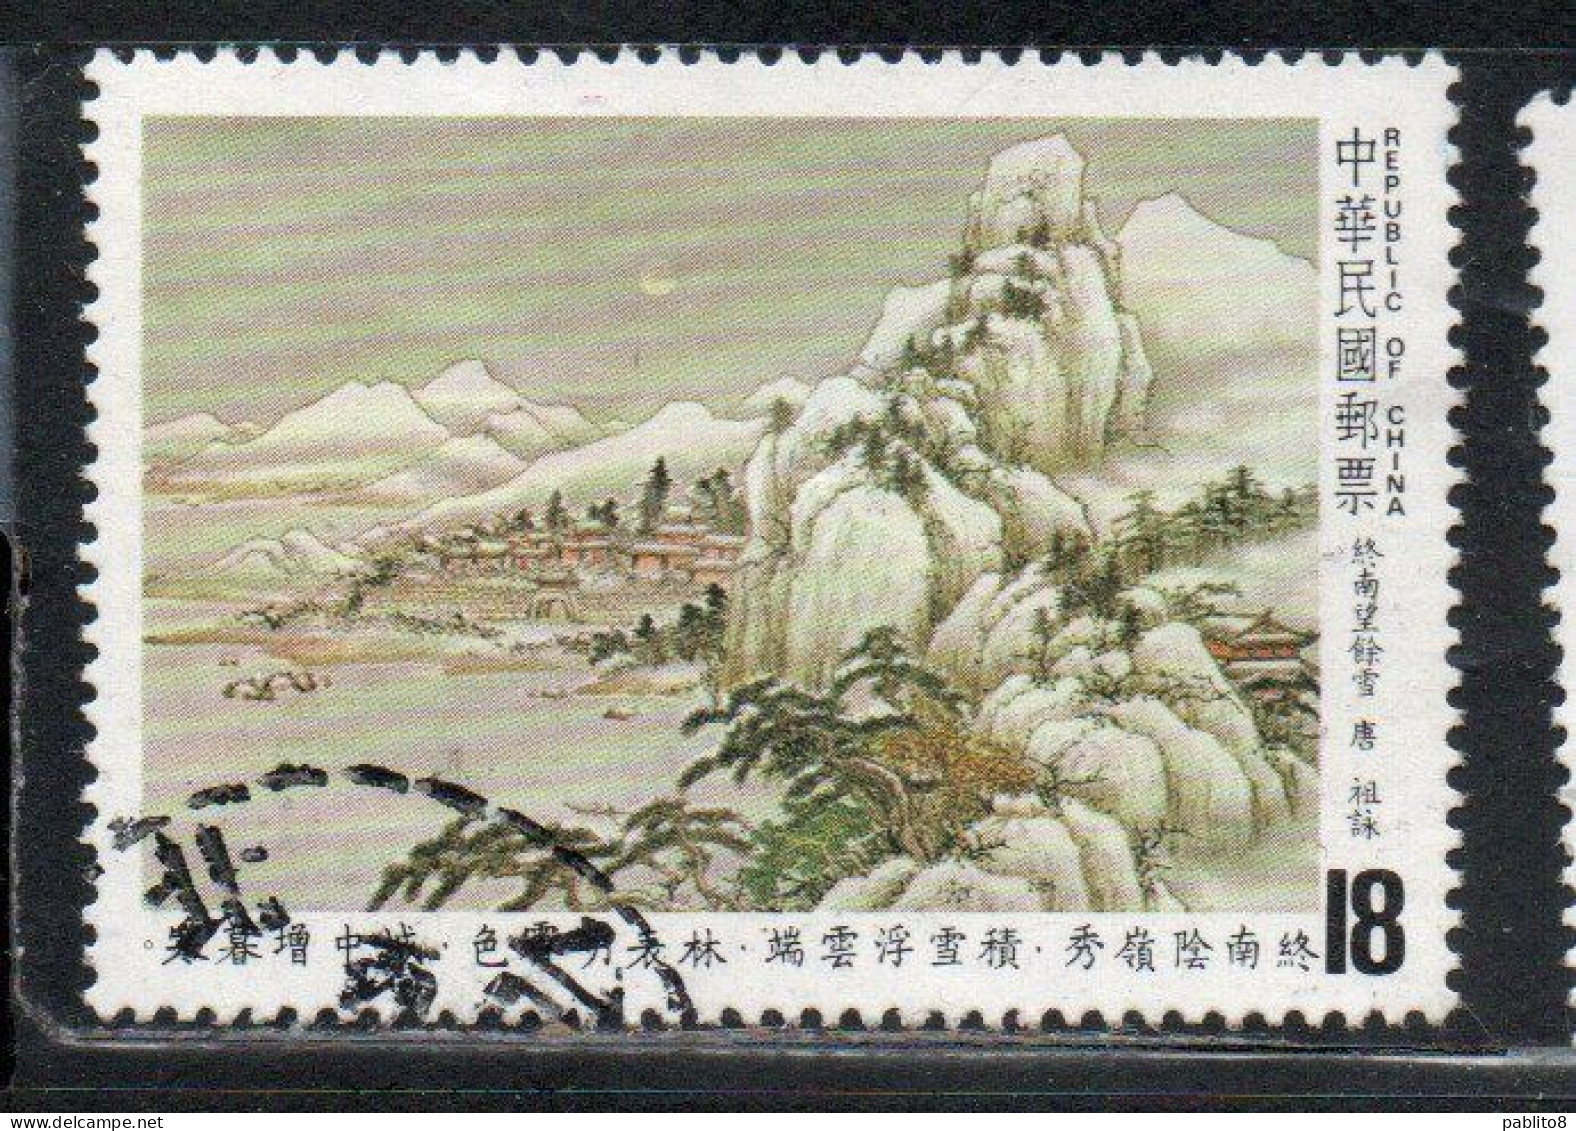 CHINA REPUBLIC CINA TAIWAN FORMOSA 1982 TANG DINASTY POETRY ILLUSTRATION LOOKING AT SNOW DRITTS 18$ USED USATO OBLITERE' - Used Stamps